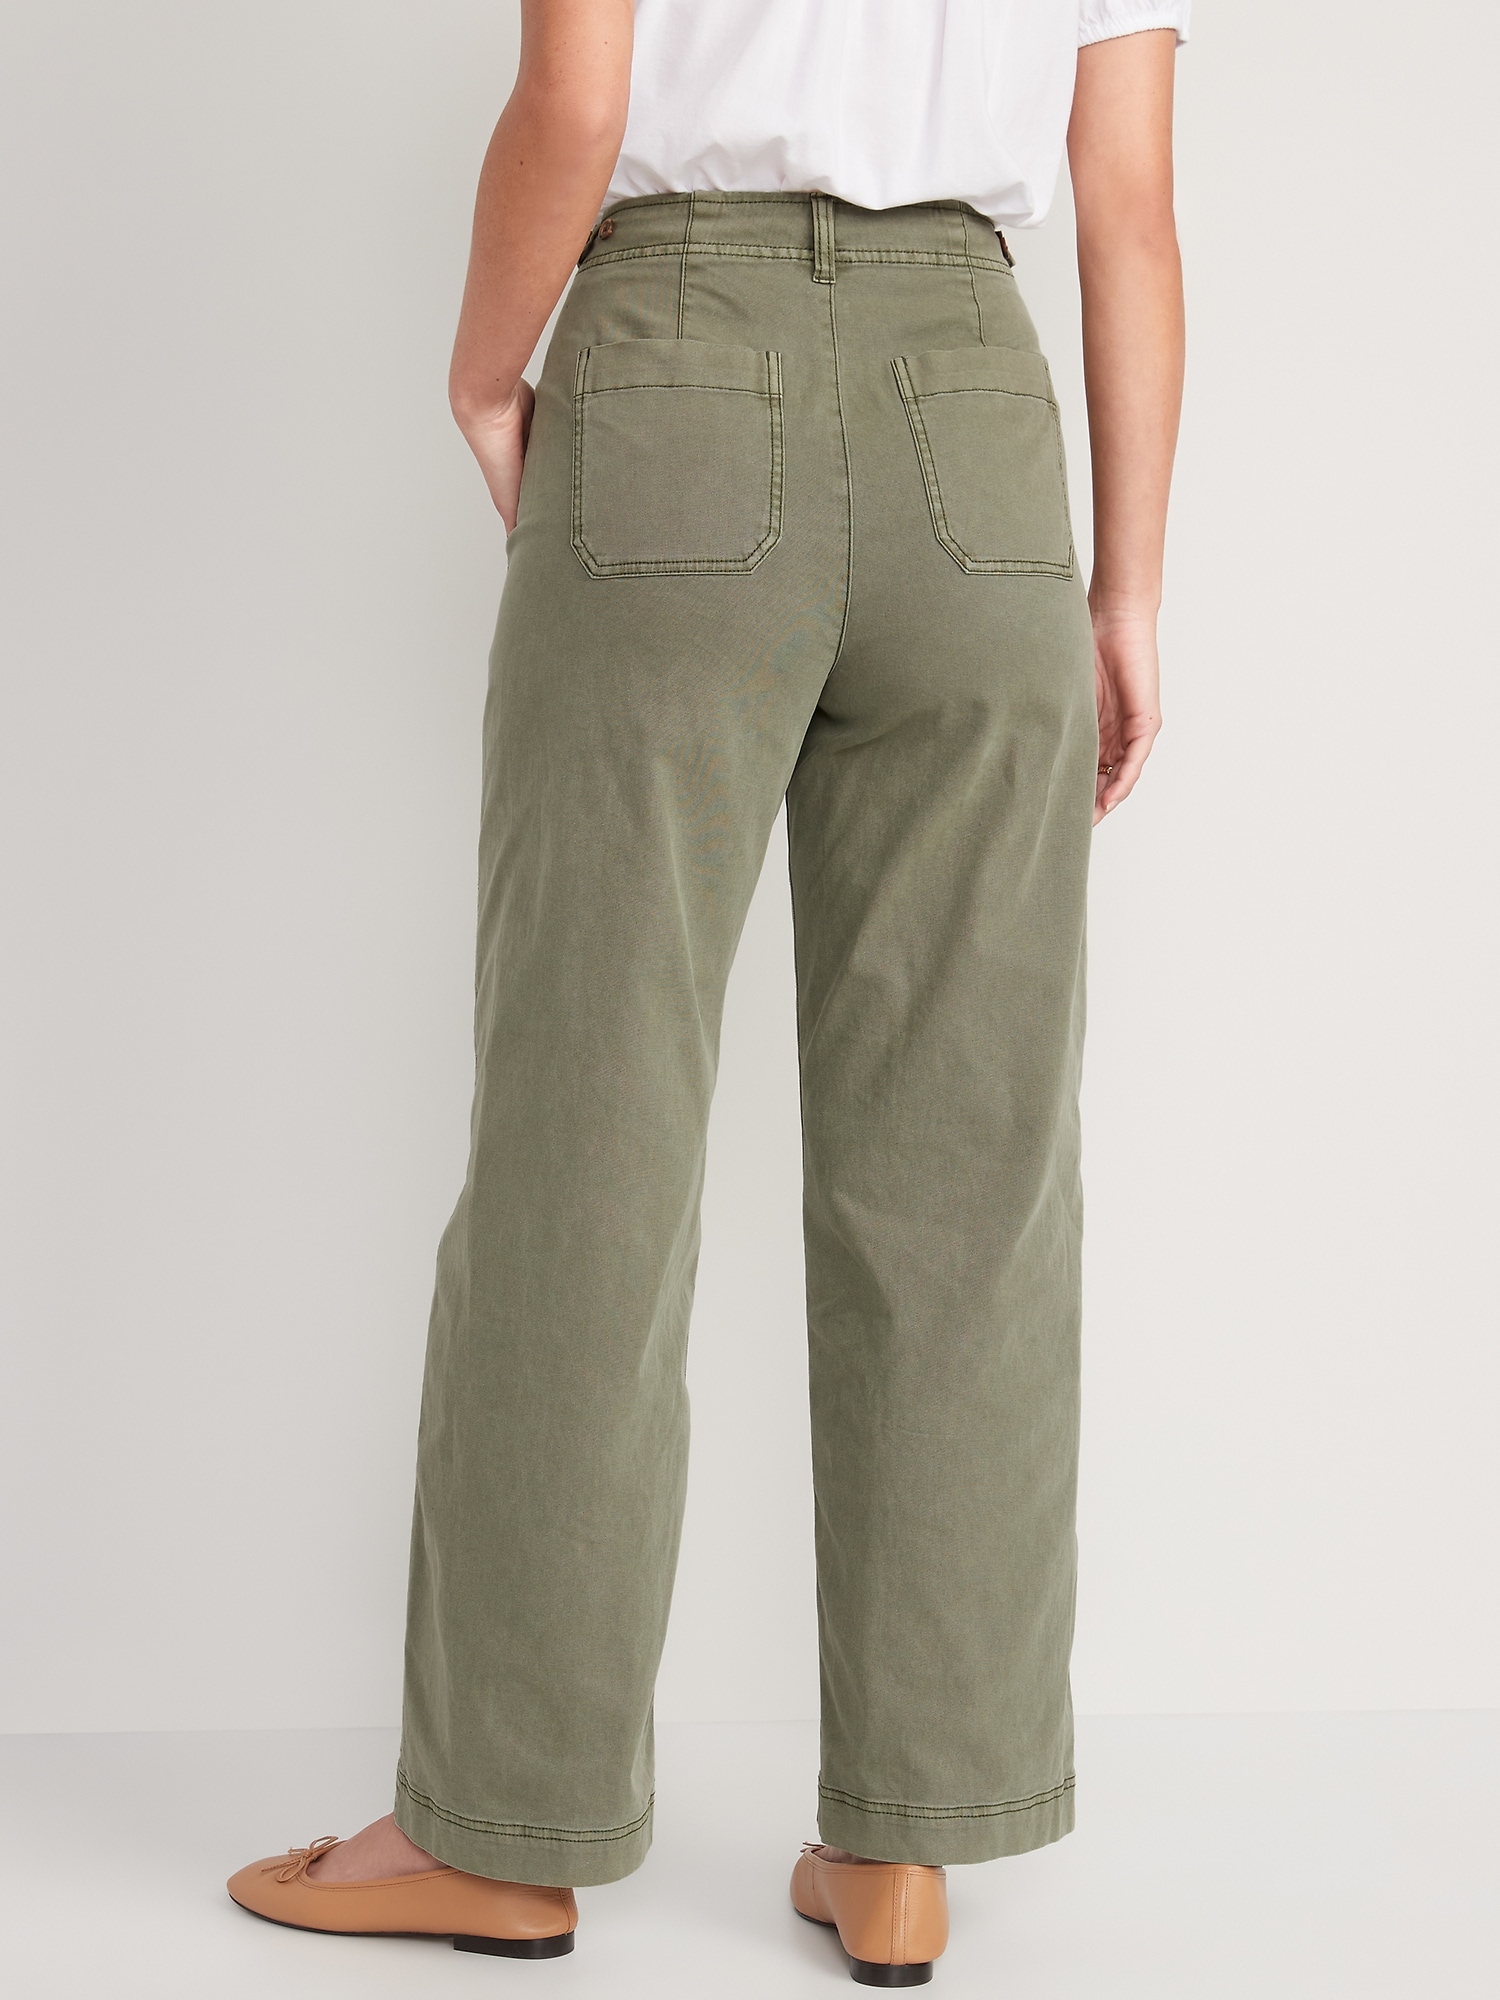 Straight Non-Stretch Canvas Workwear Pants, Old Navy